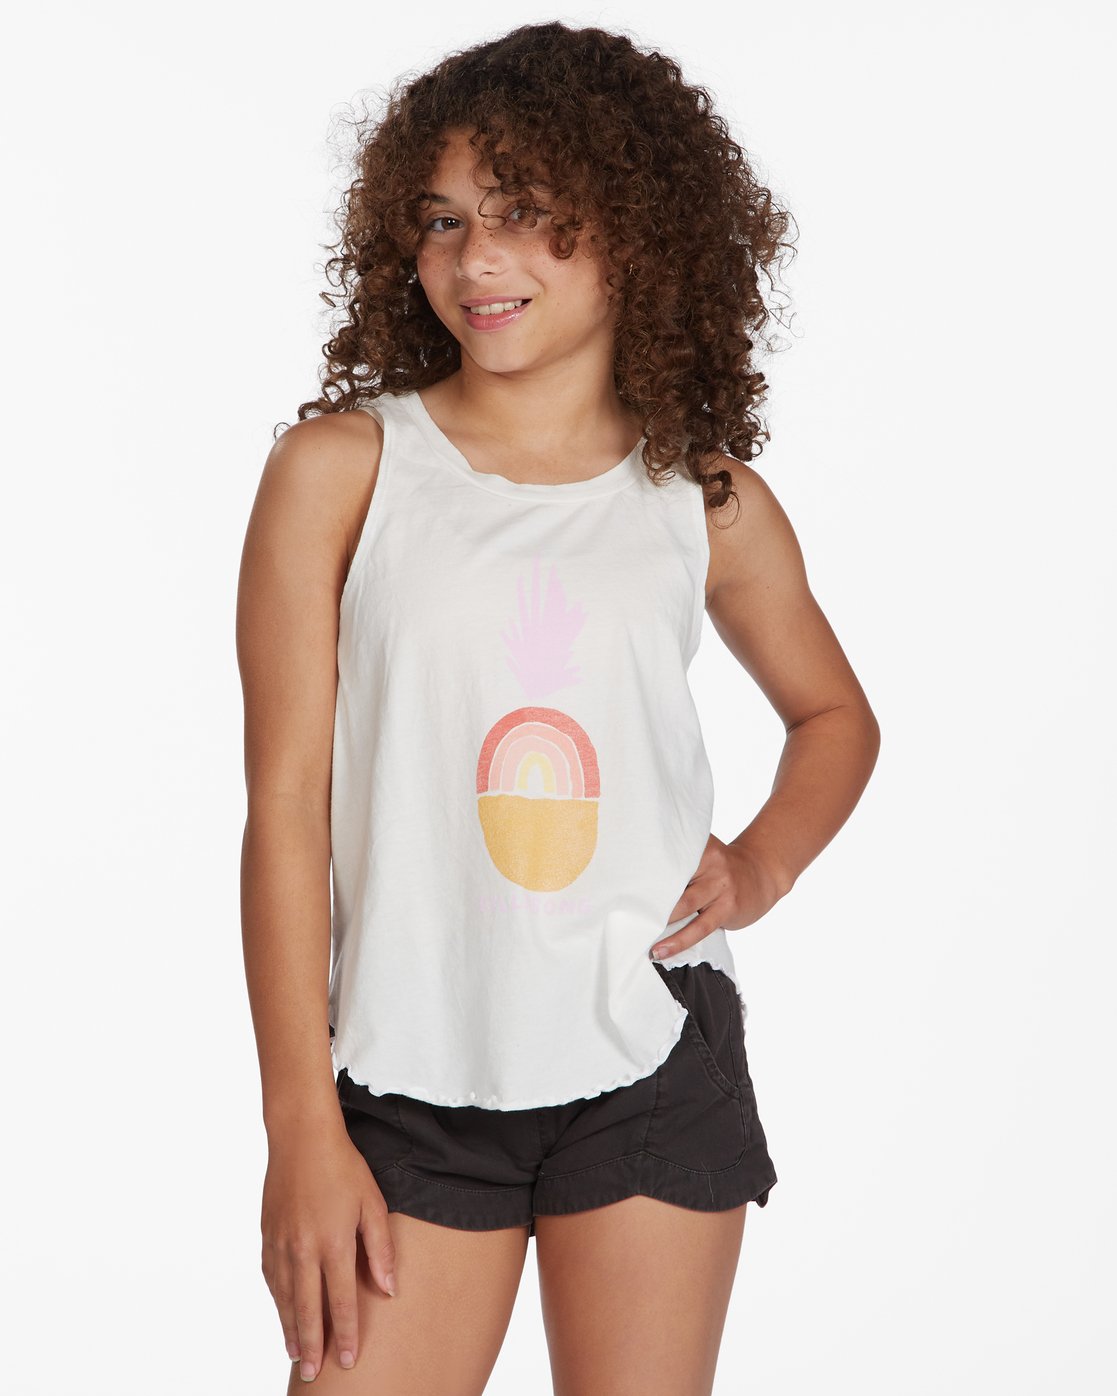 GIRLS MEANT TO BE TANK TOP - ABGZT00264